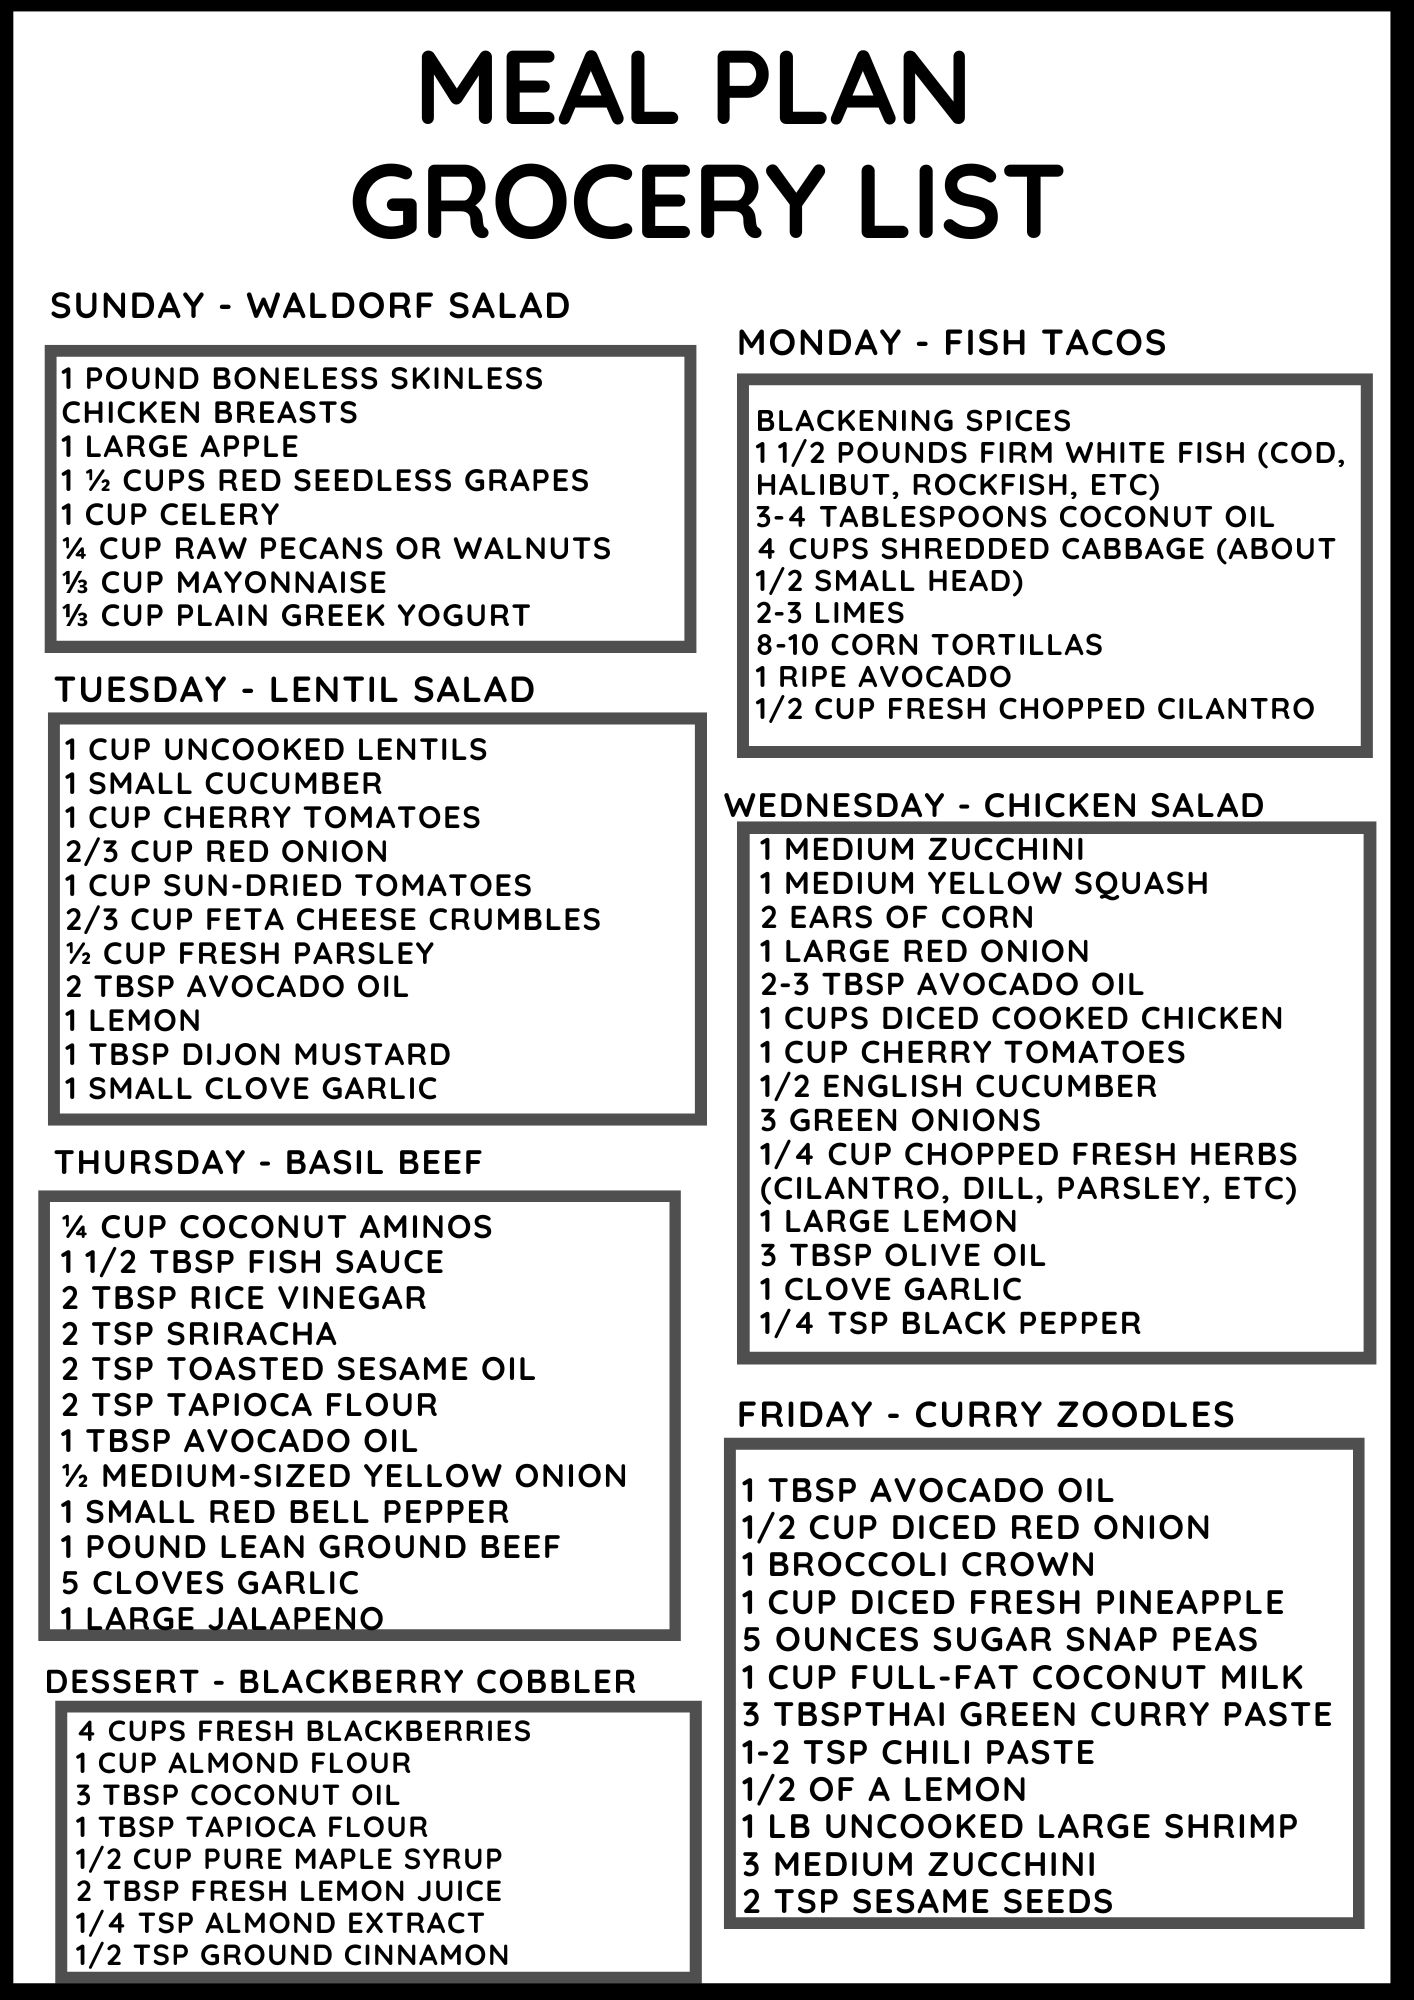 Grocery list for healthy meal plan